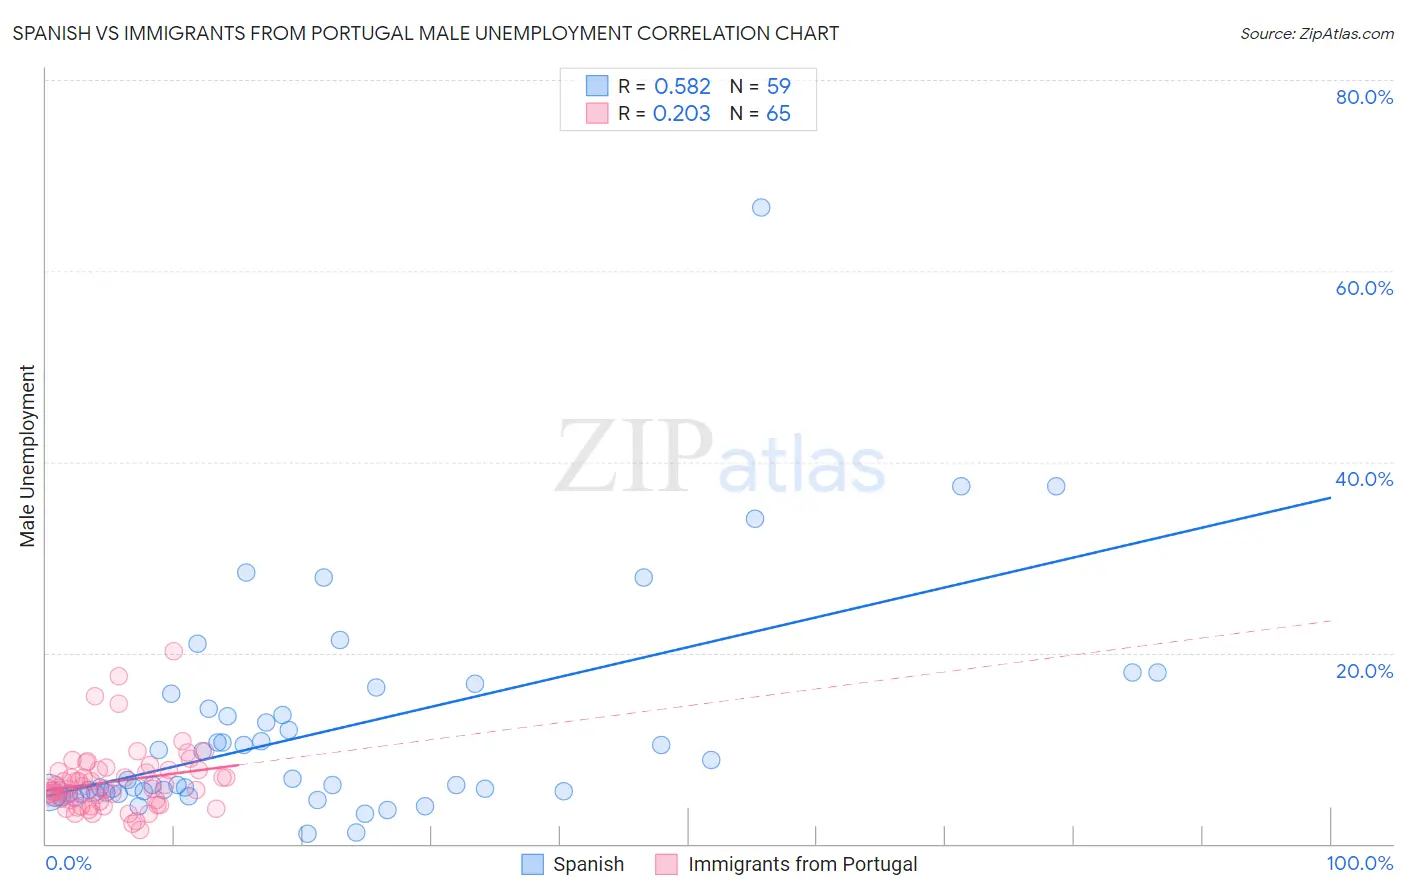 Spanish vs Immigrants from Portugal Male Unemployment